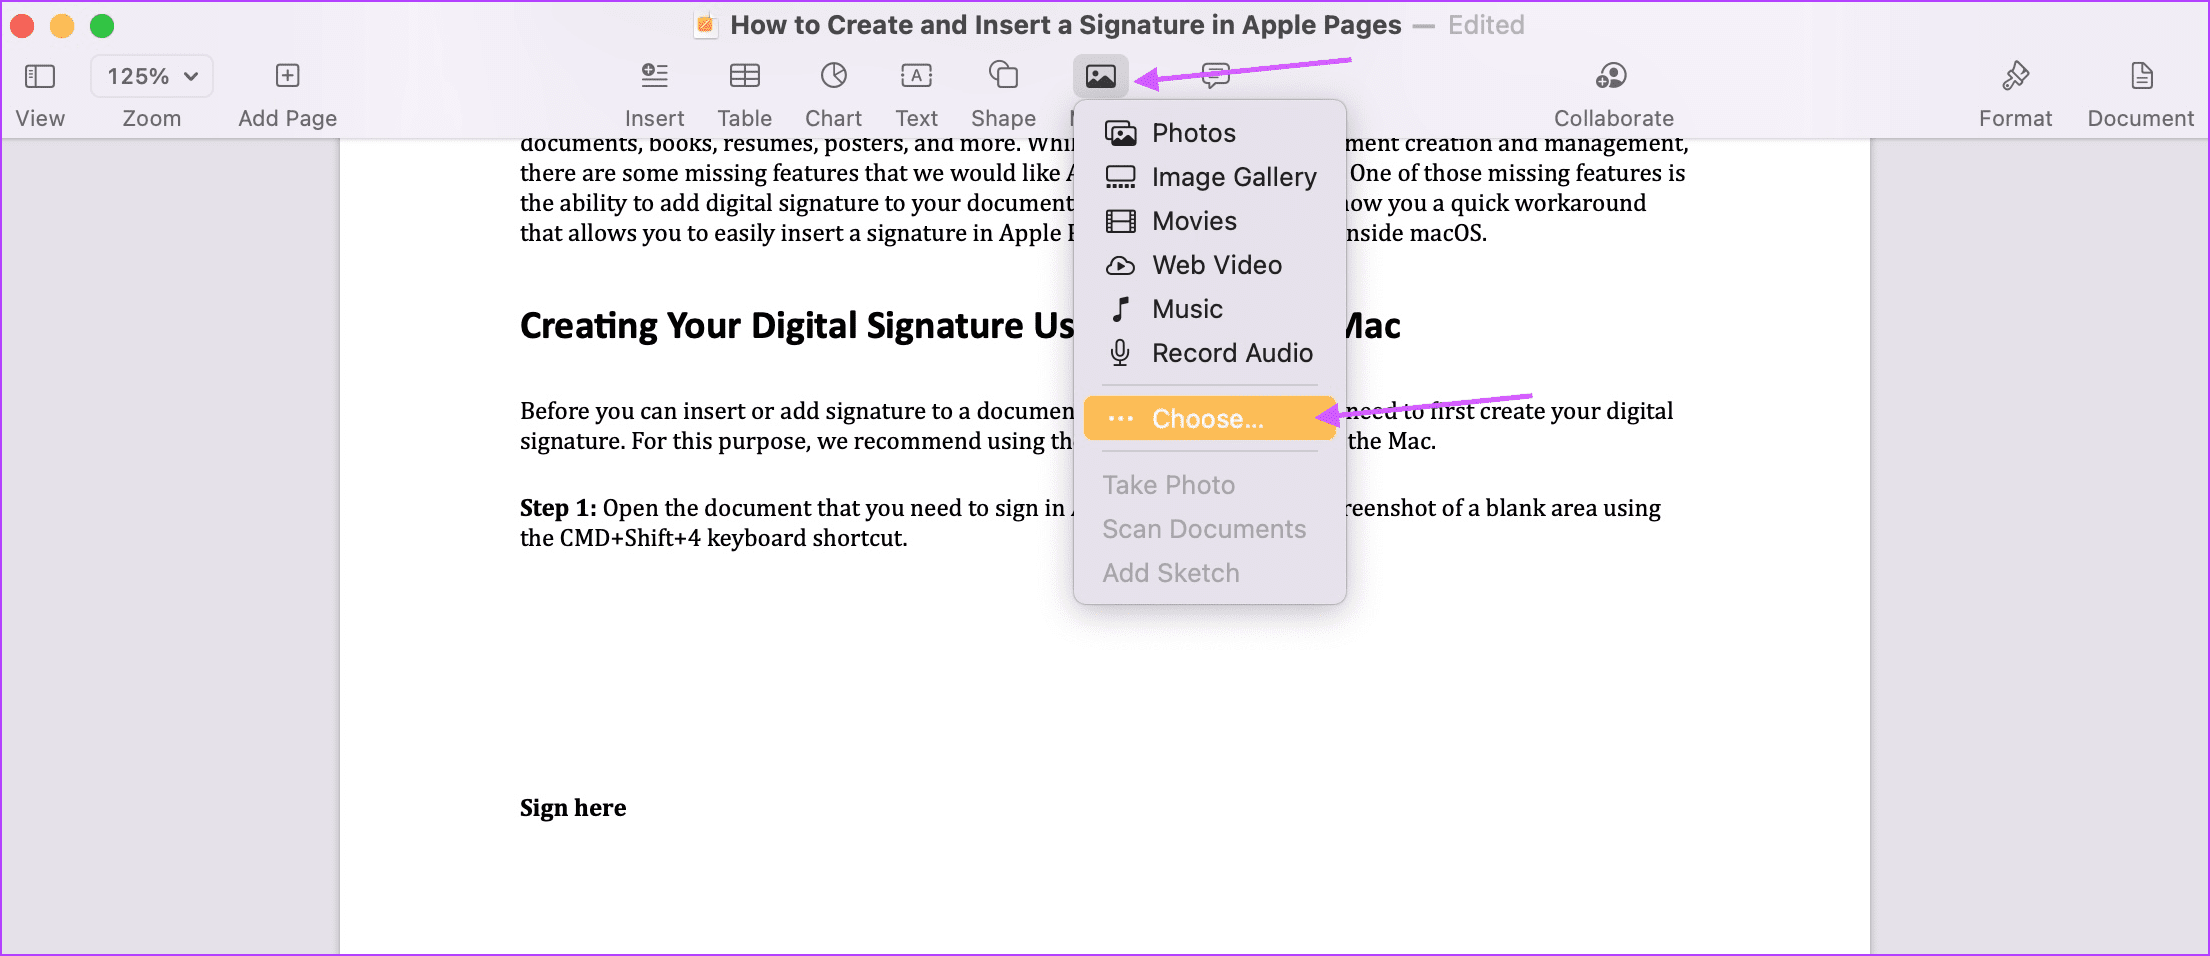 Insert Your Signature in Apple 1 Pages